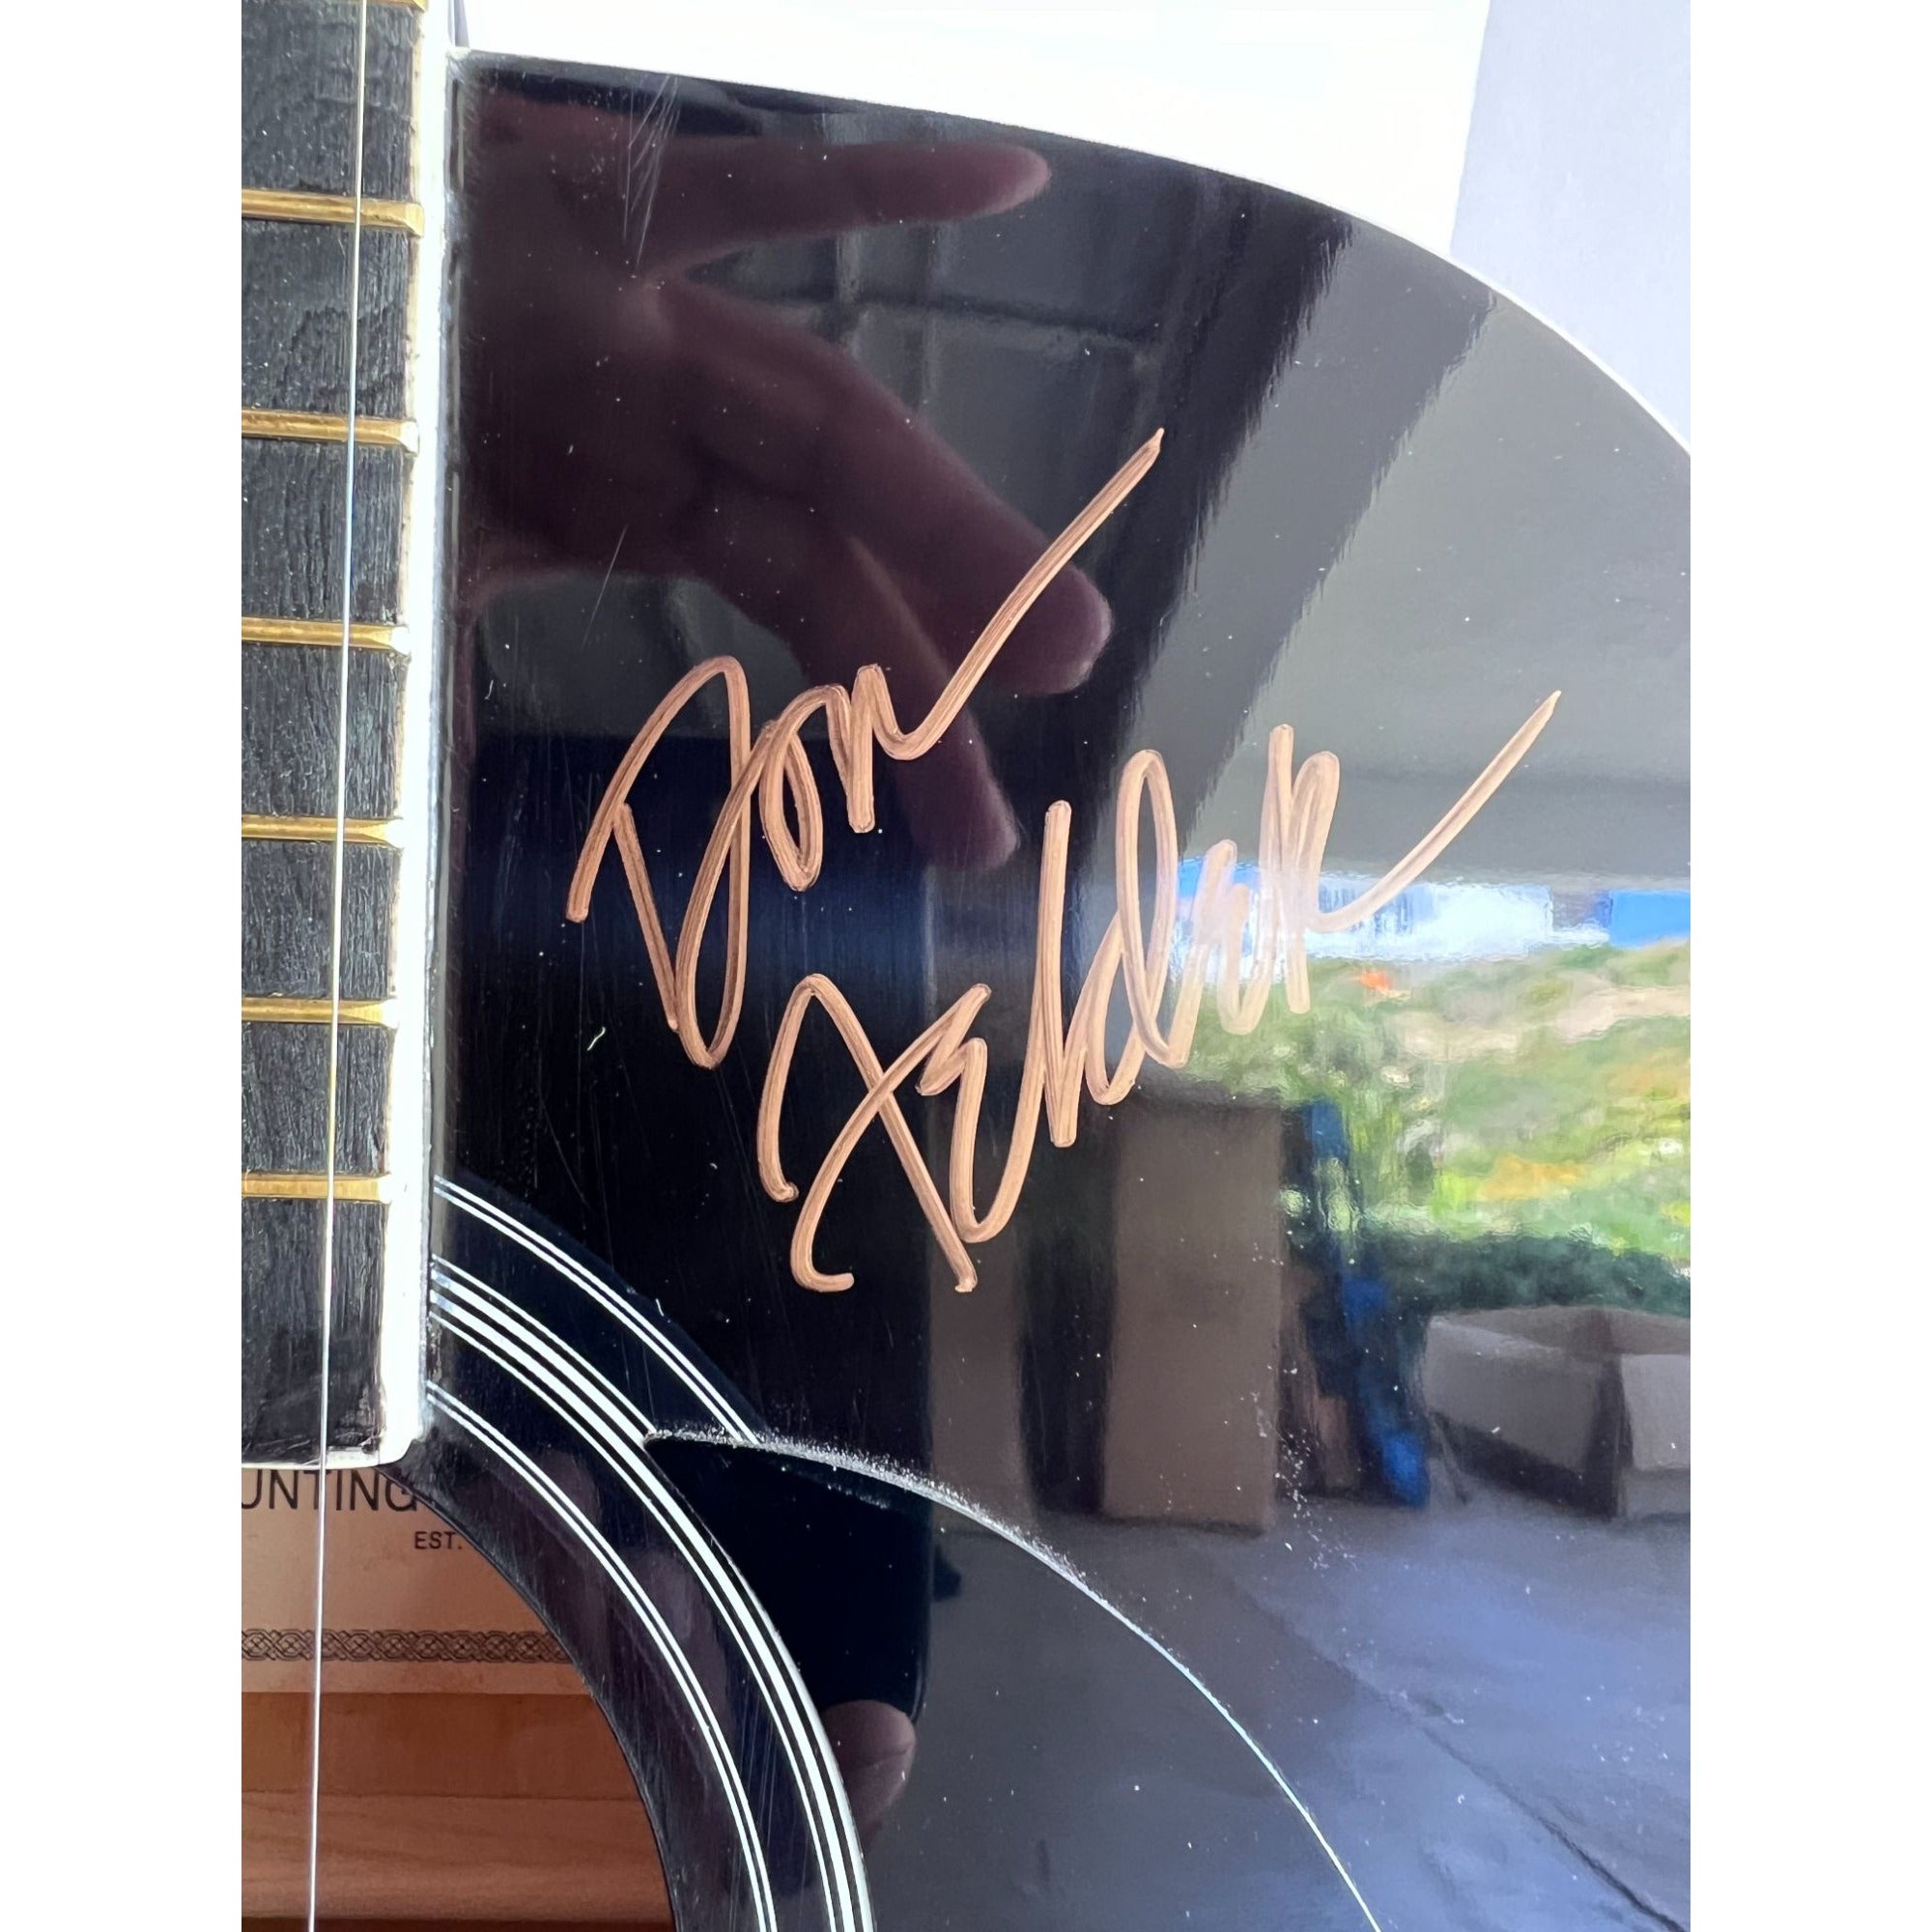 The Eagles Bernie Laden Joe Walsh Don Henley Glenn Frey Randy Meisner signed and inscribed full size acoustic guitar with proof